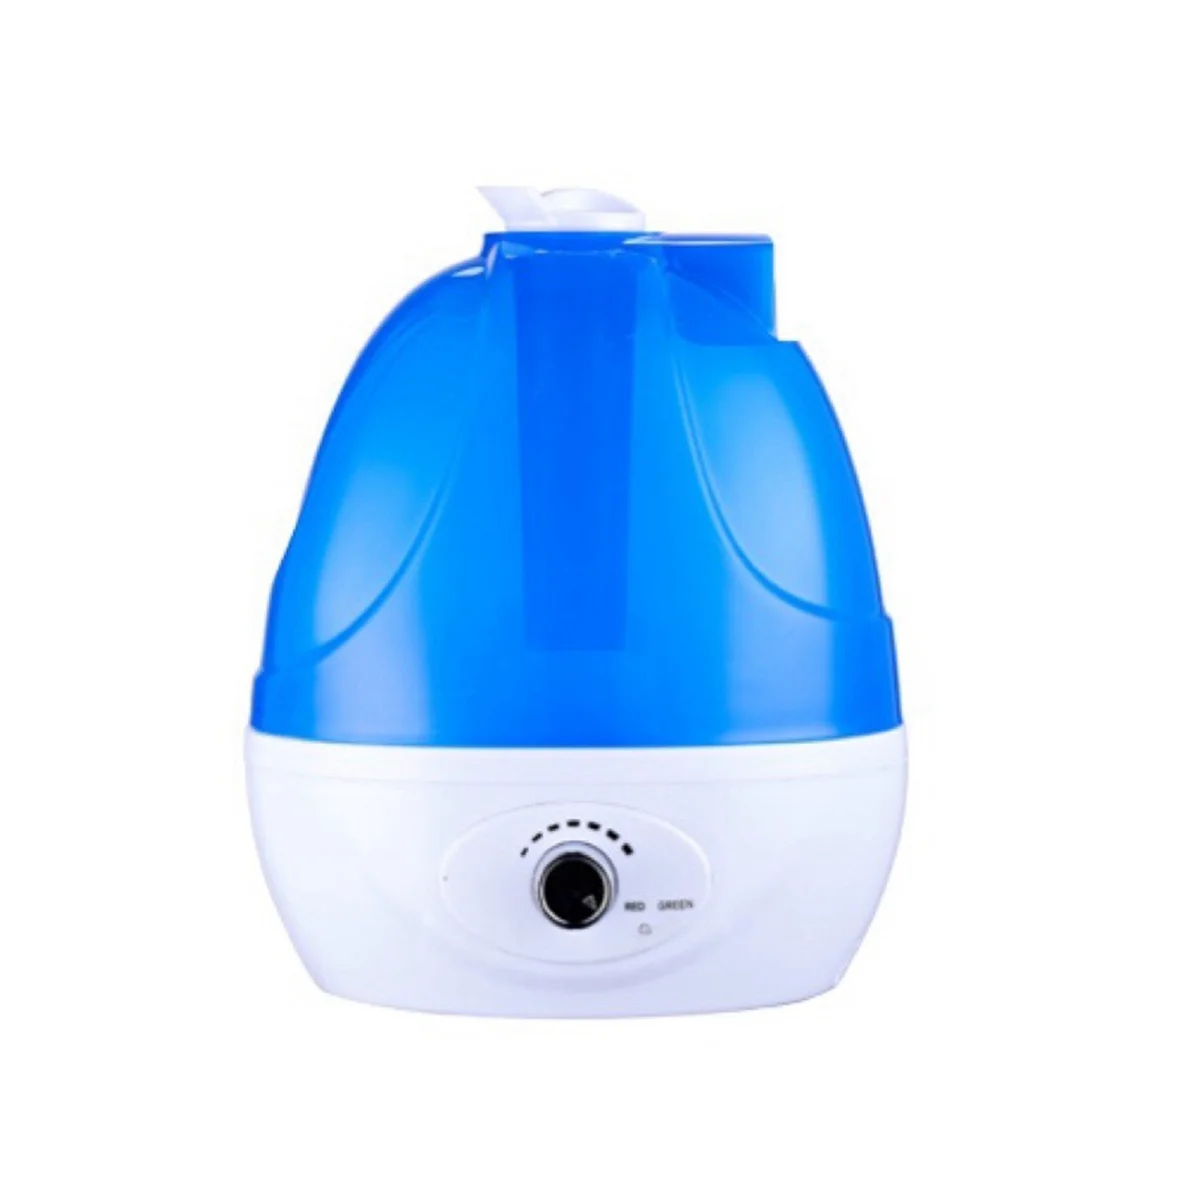 

2.5L High Volume Air Purification Humidifier Portable Plugged in for Use Water Atomizer Diffuser for Home Office US Plug